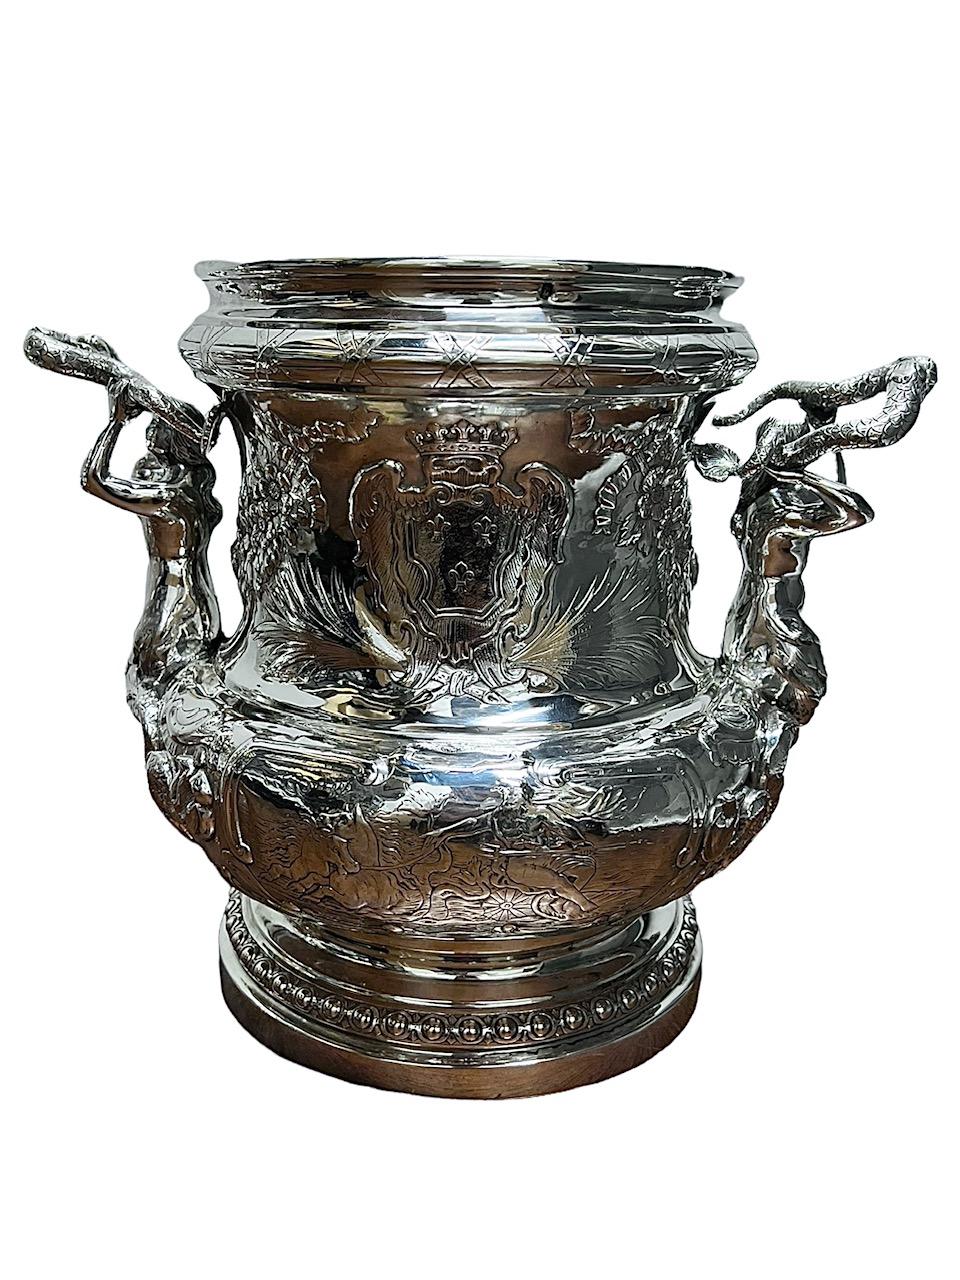 1890 Pair of German Solid Sterling Silver Coolers (Buckets), Sea Creatures In Fair Condition For Sale In North Miami, FL